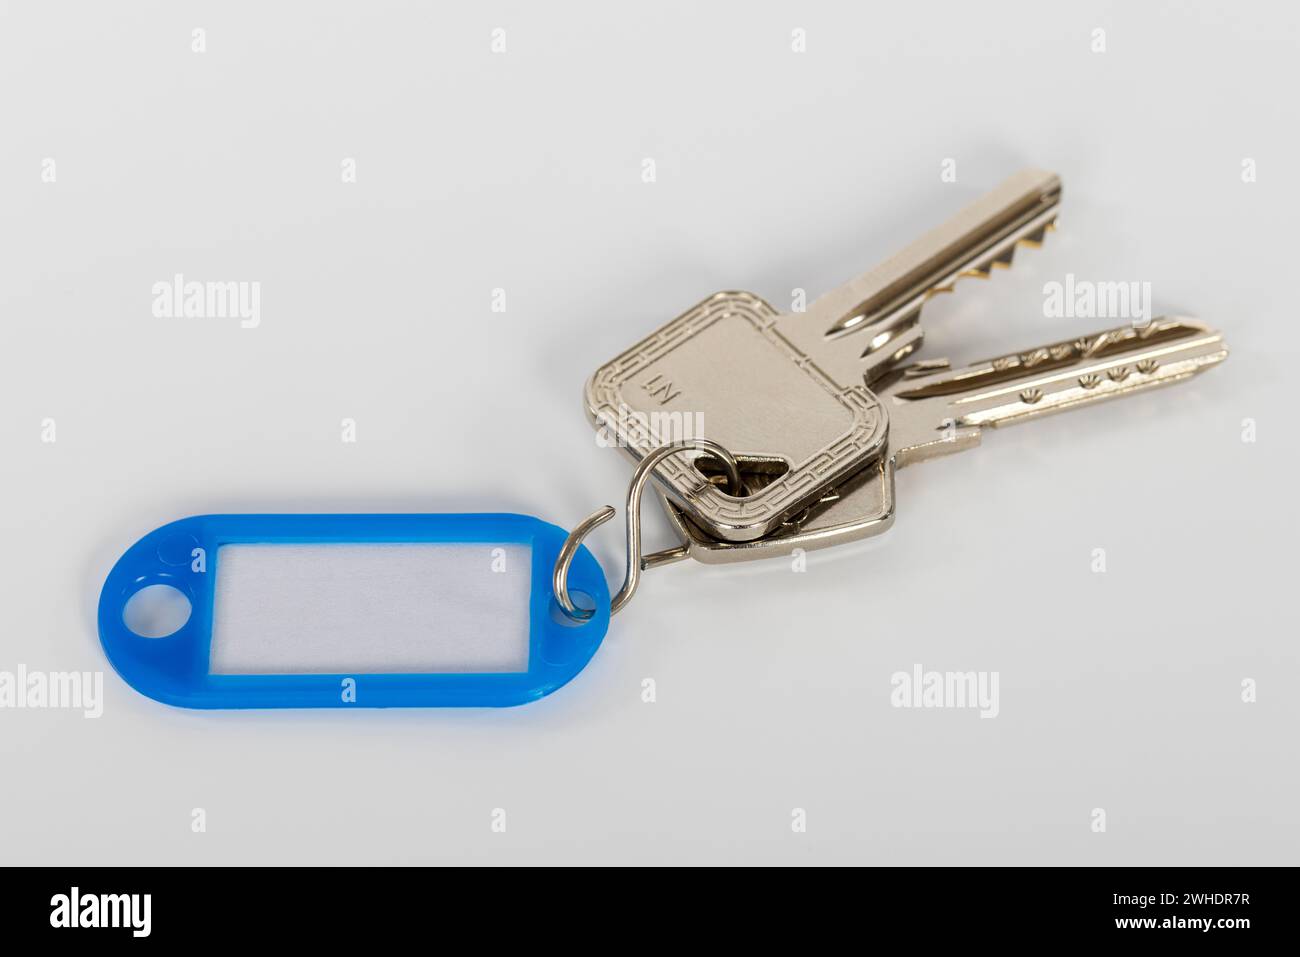 Key ring with blue key fob, without lettering, white background, Stock Photo